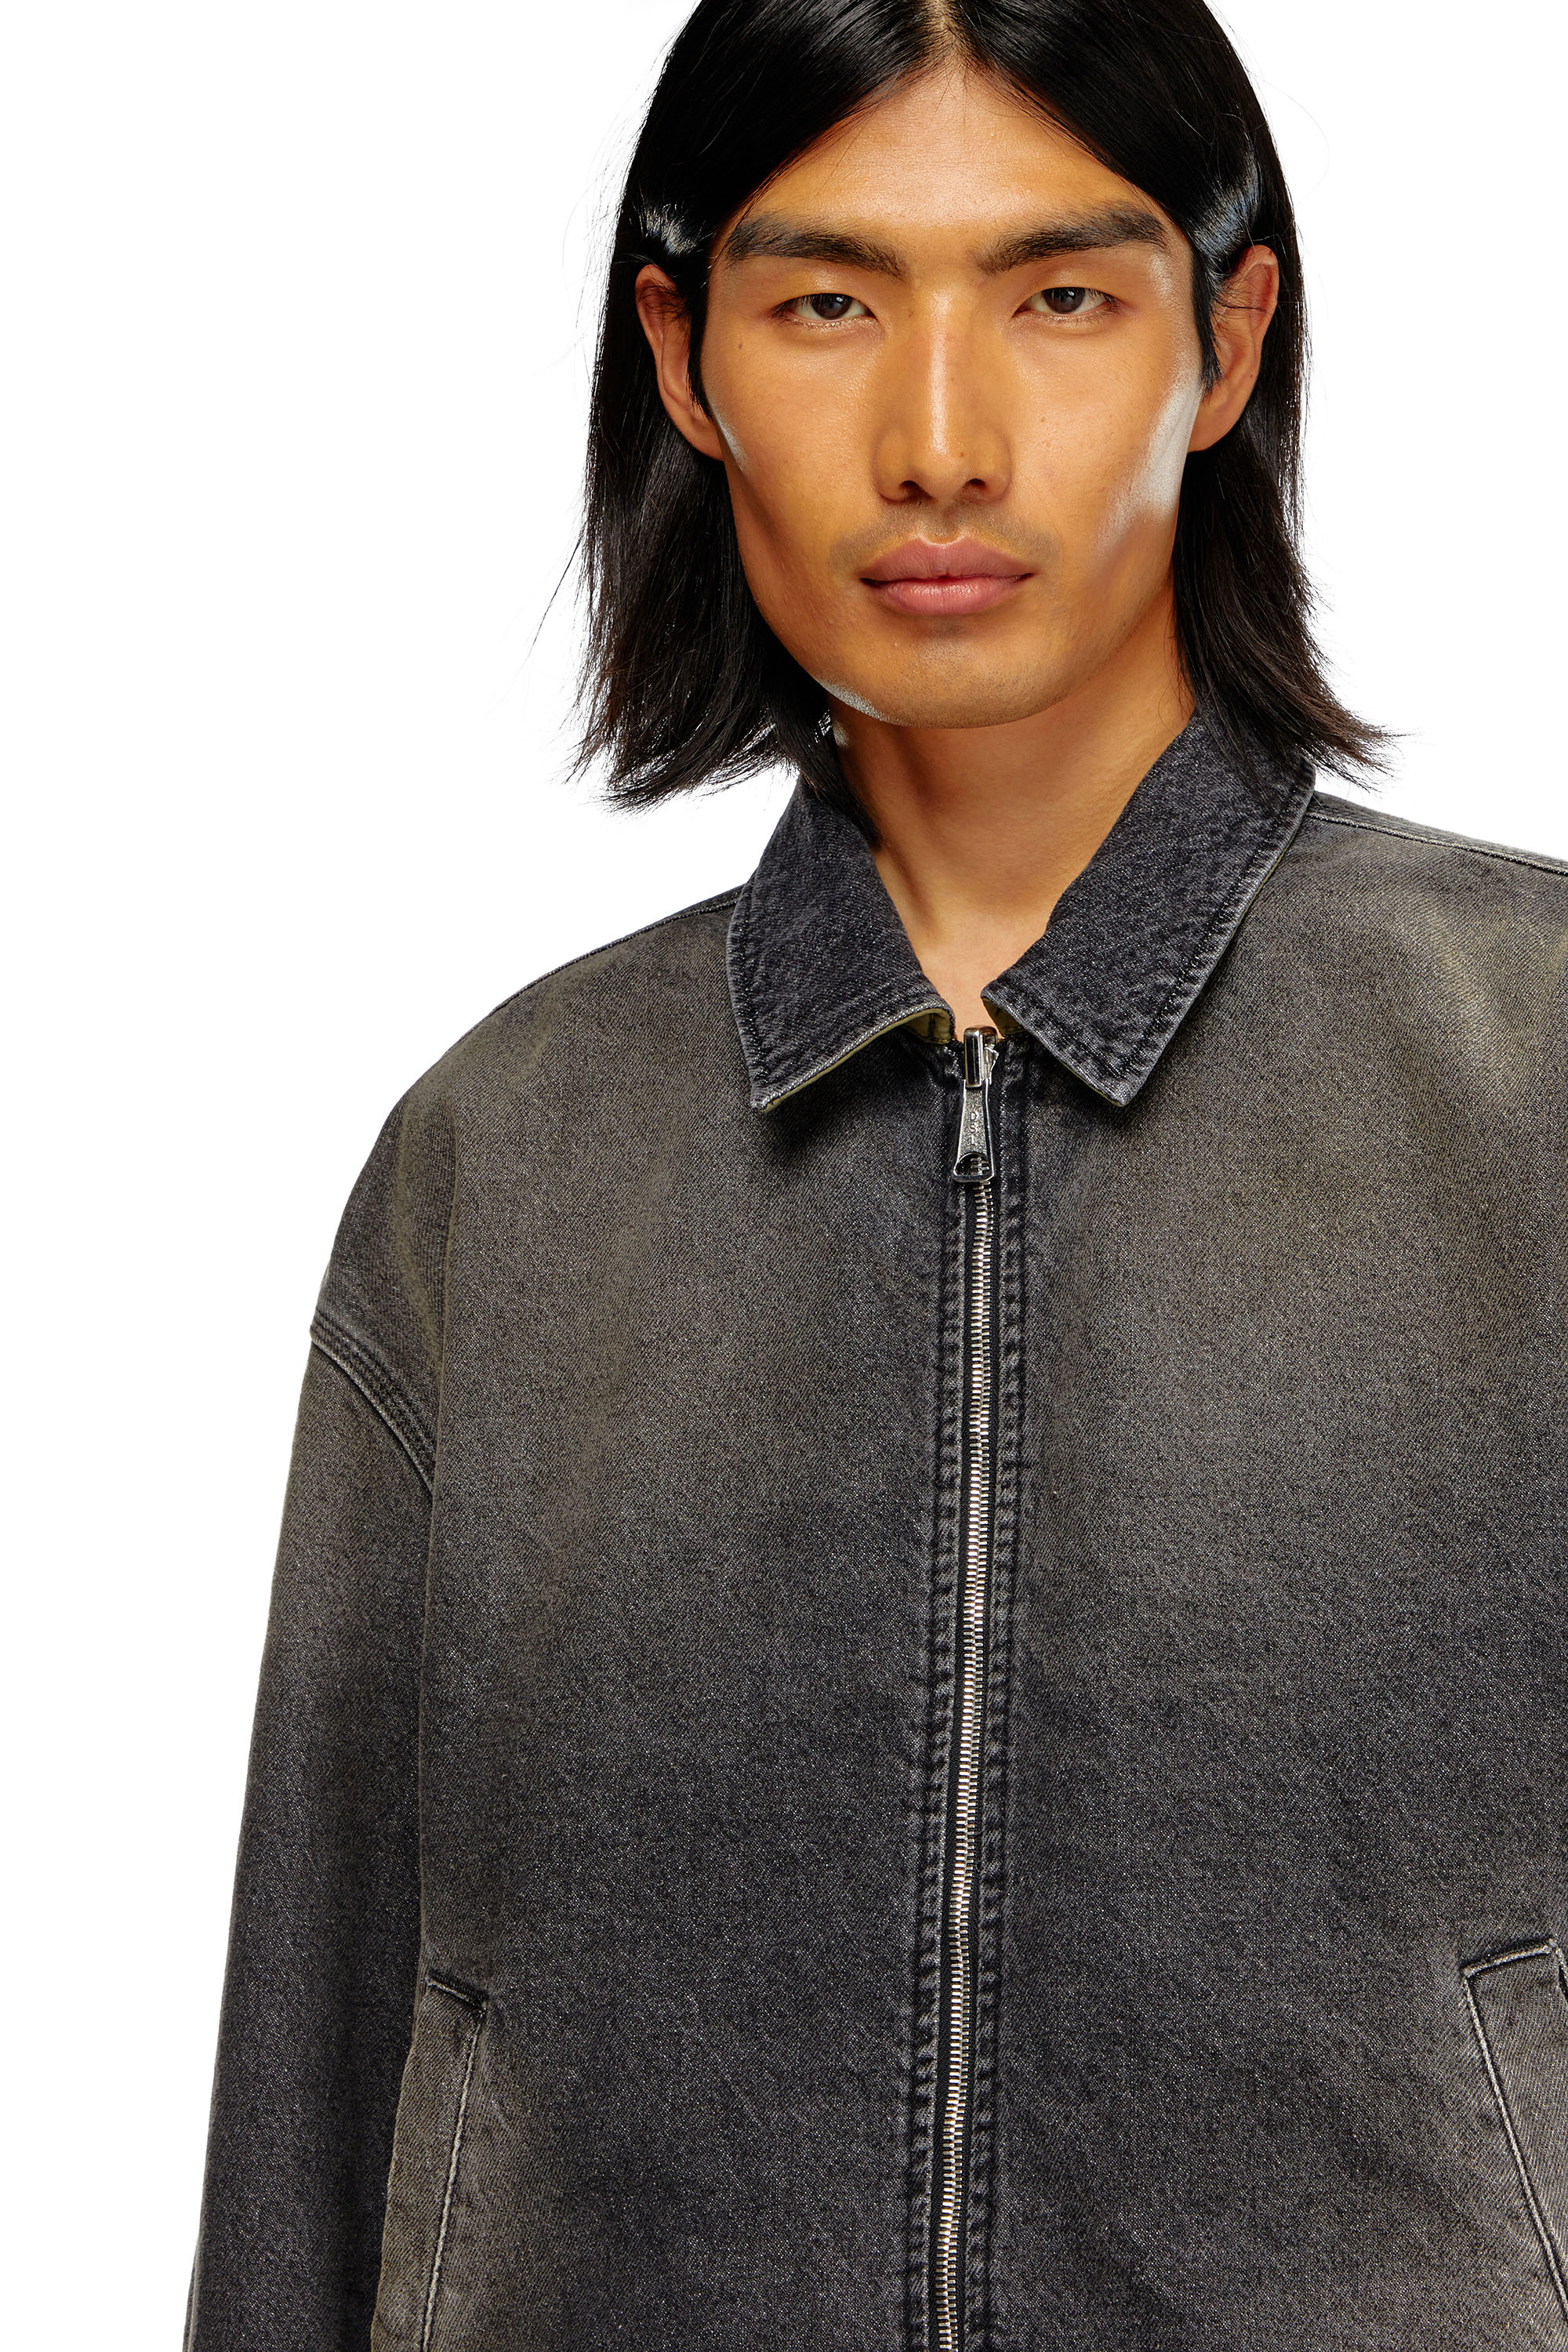 Diesel - D-STACK-S, Male Reversible jacket in denim and nylon in ブラック - Image 5